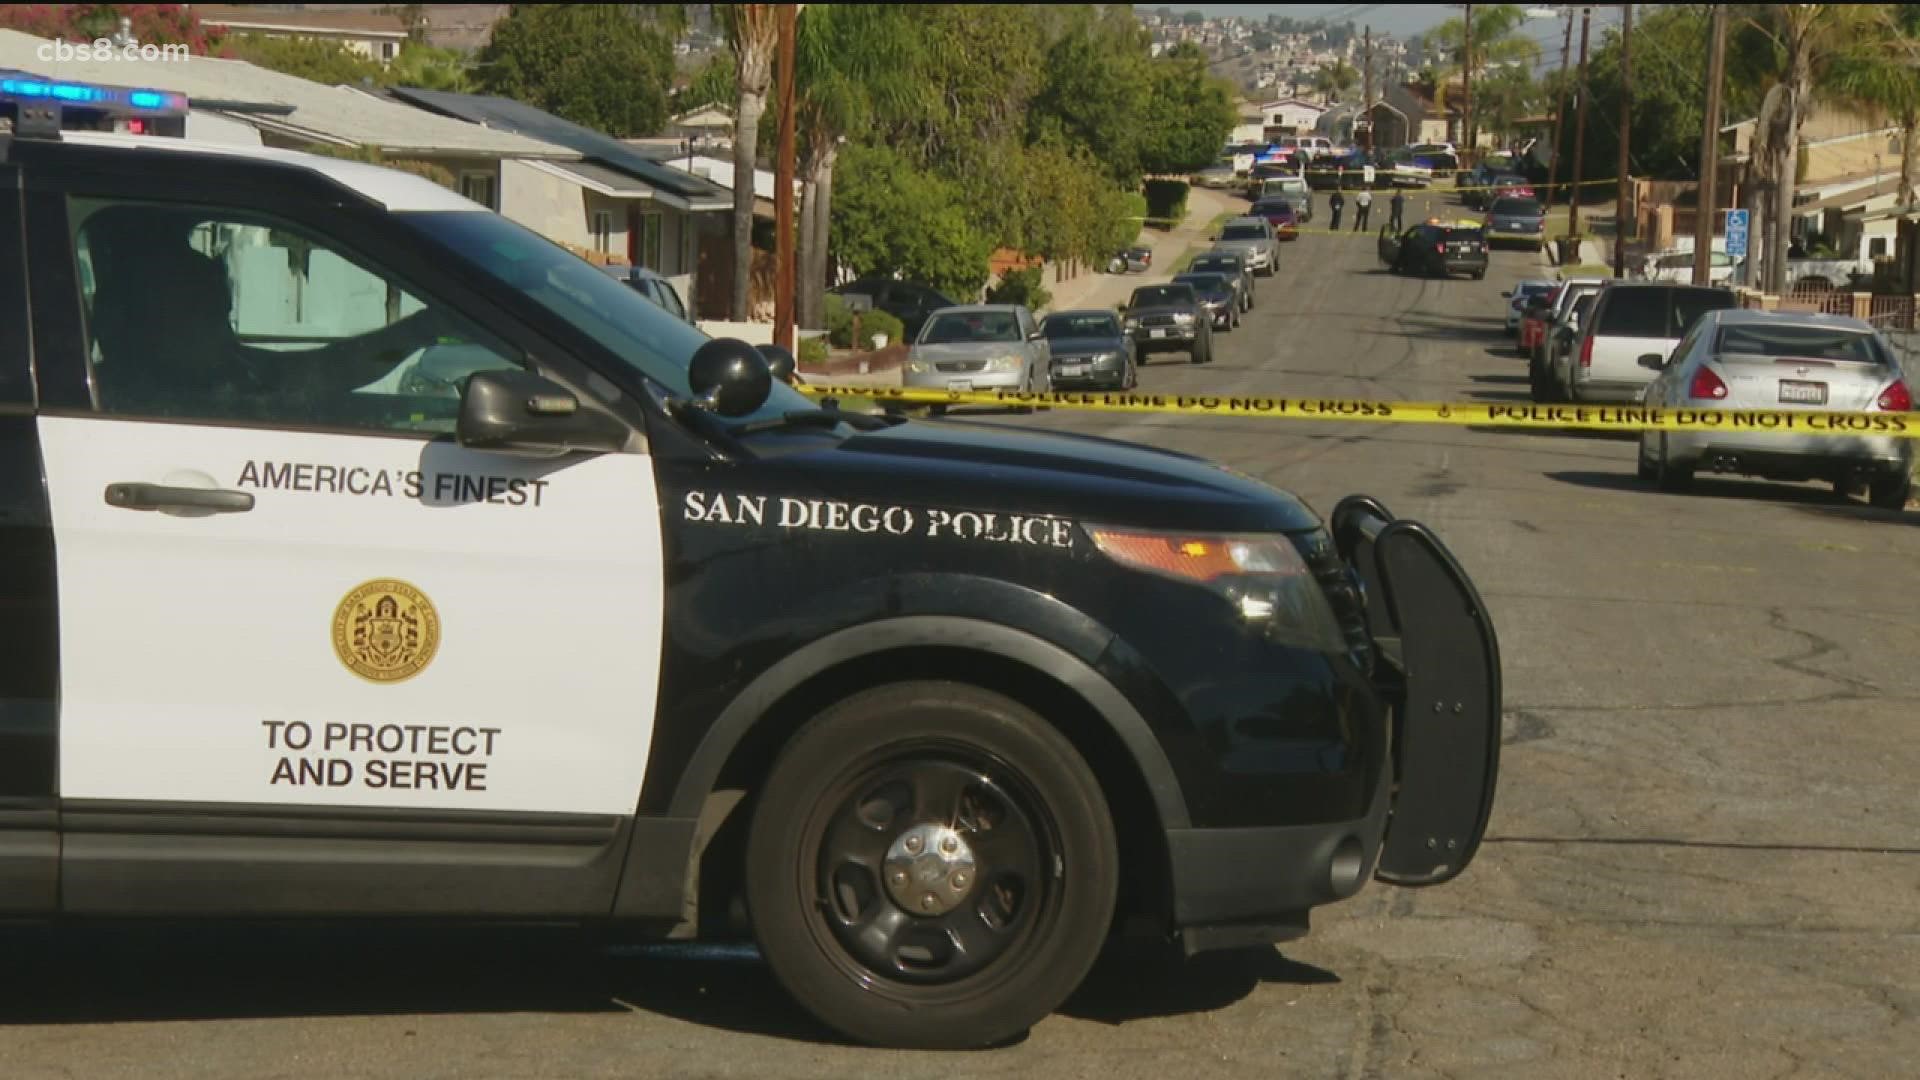 Officers responding to a report of gunfire about 1:30 p.m. on Friday found the victim lying in the roadway on Sabre Street, near Sawtelle Avenue in east San Diego.